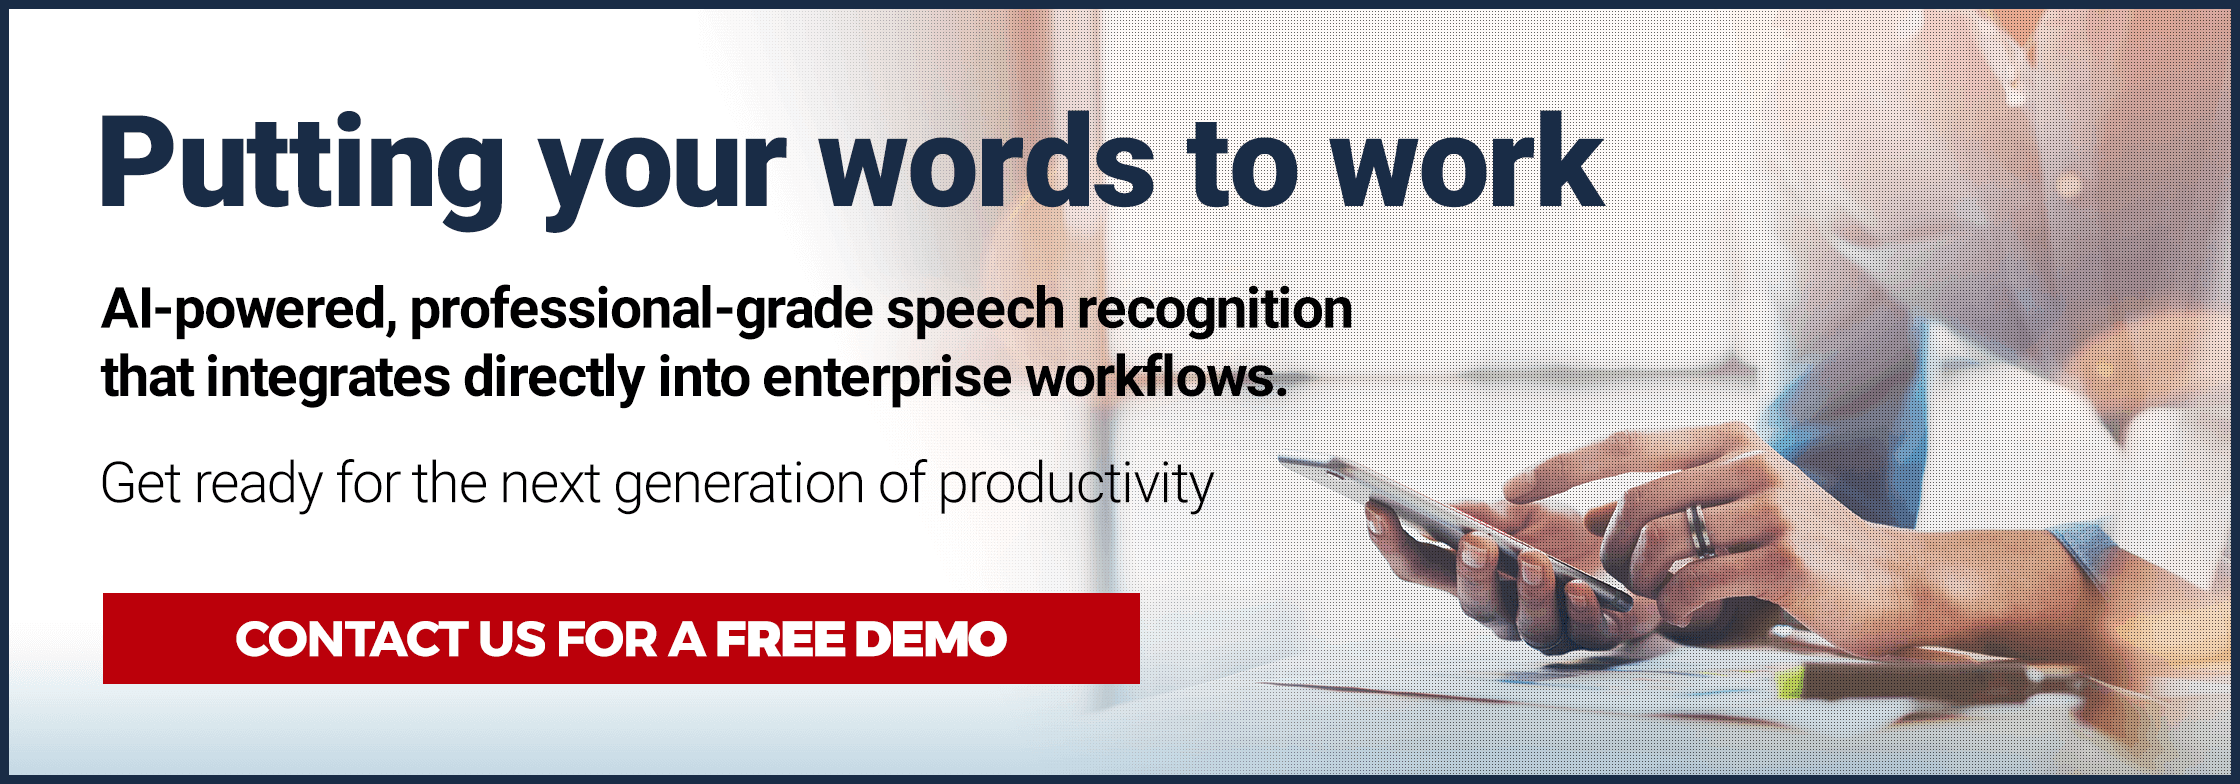 Putting your words to work. AI Powered, professional-grade speech recognition that integrates directly into enterprise workflows